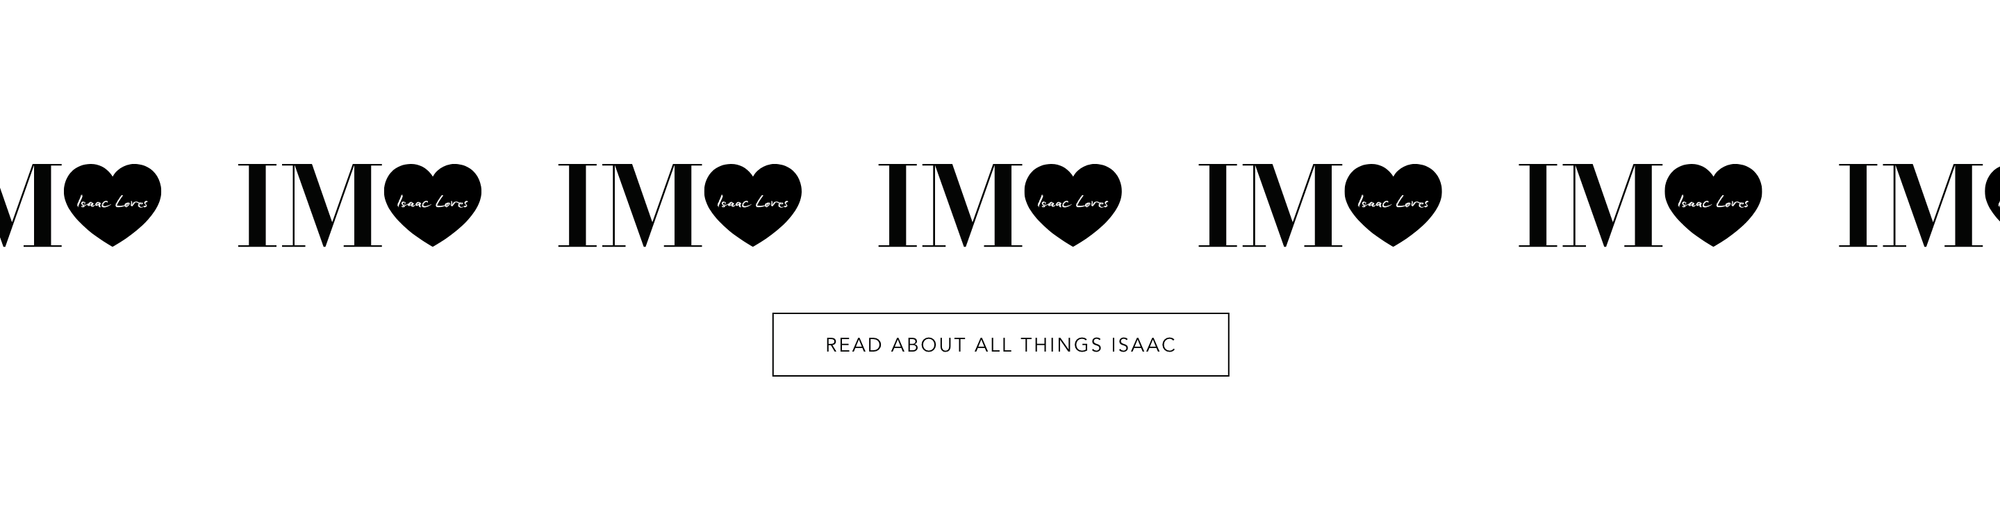 Letters IM with a black heart next to it with "Isaac loves" in the center, repeated 7 times, button saying "read about all things Isaac" below